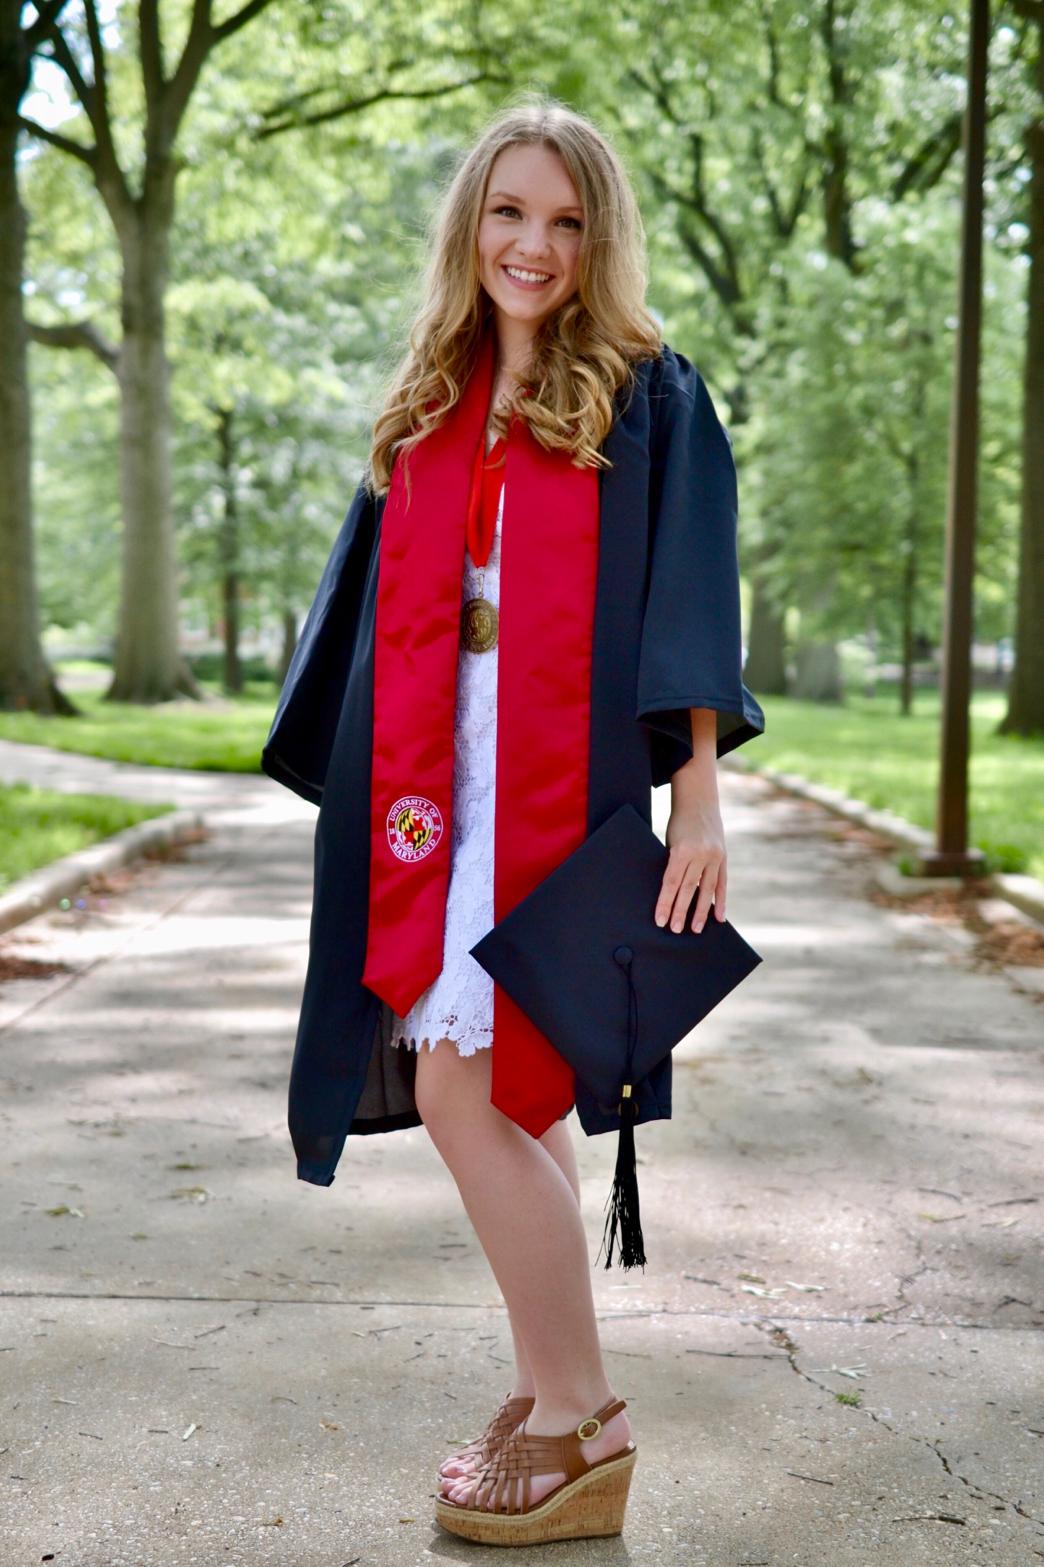 Julianne Heberlein on LinkedIn: This May I graduated from the ...